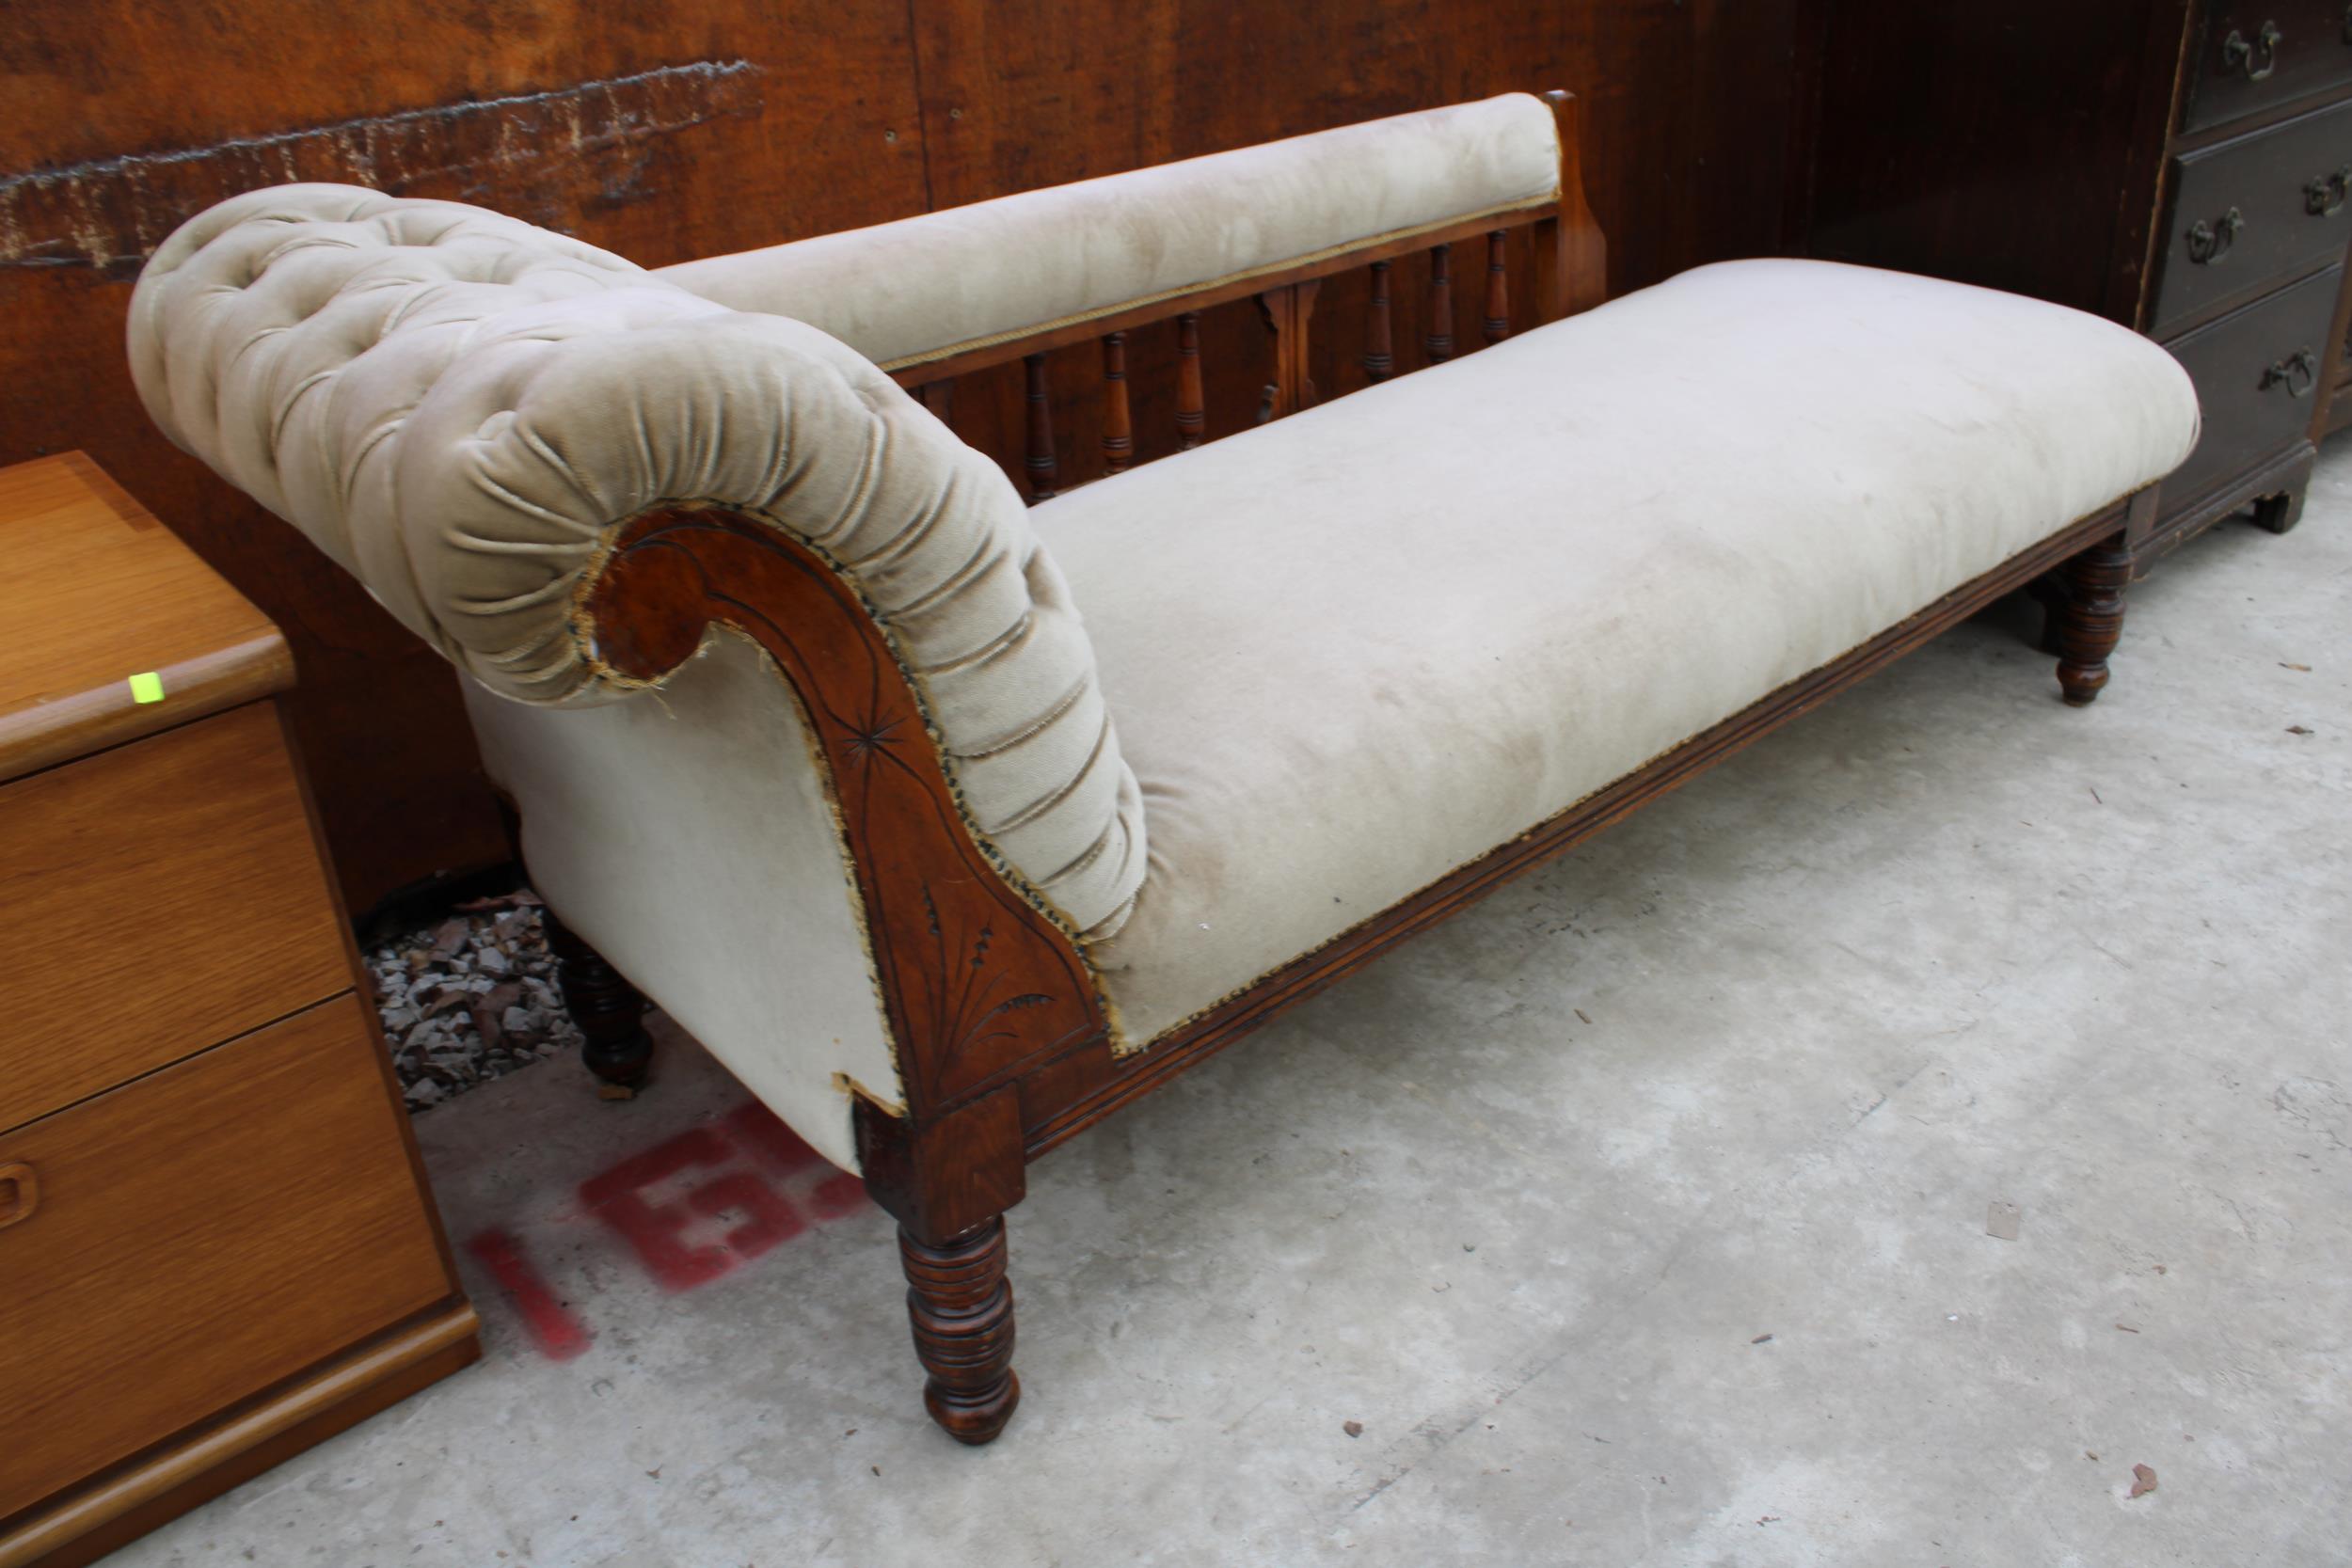 AN EDWARDIAN CHAISE LONGUE WITH TURNED UPRIGHTS AND LEGS - Image 2 of 2